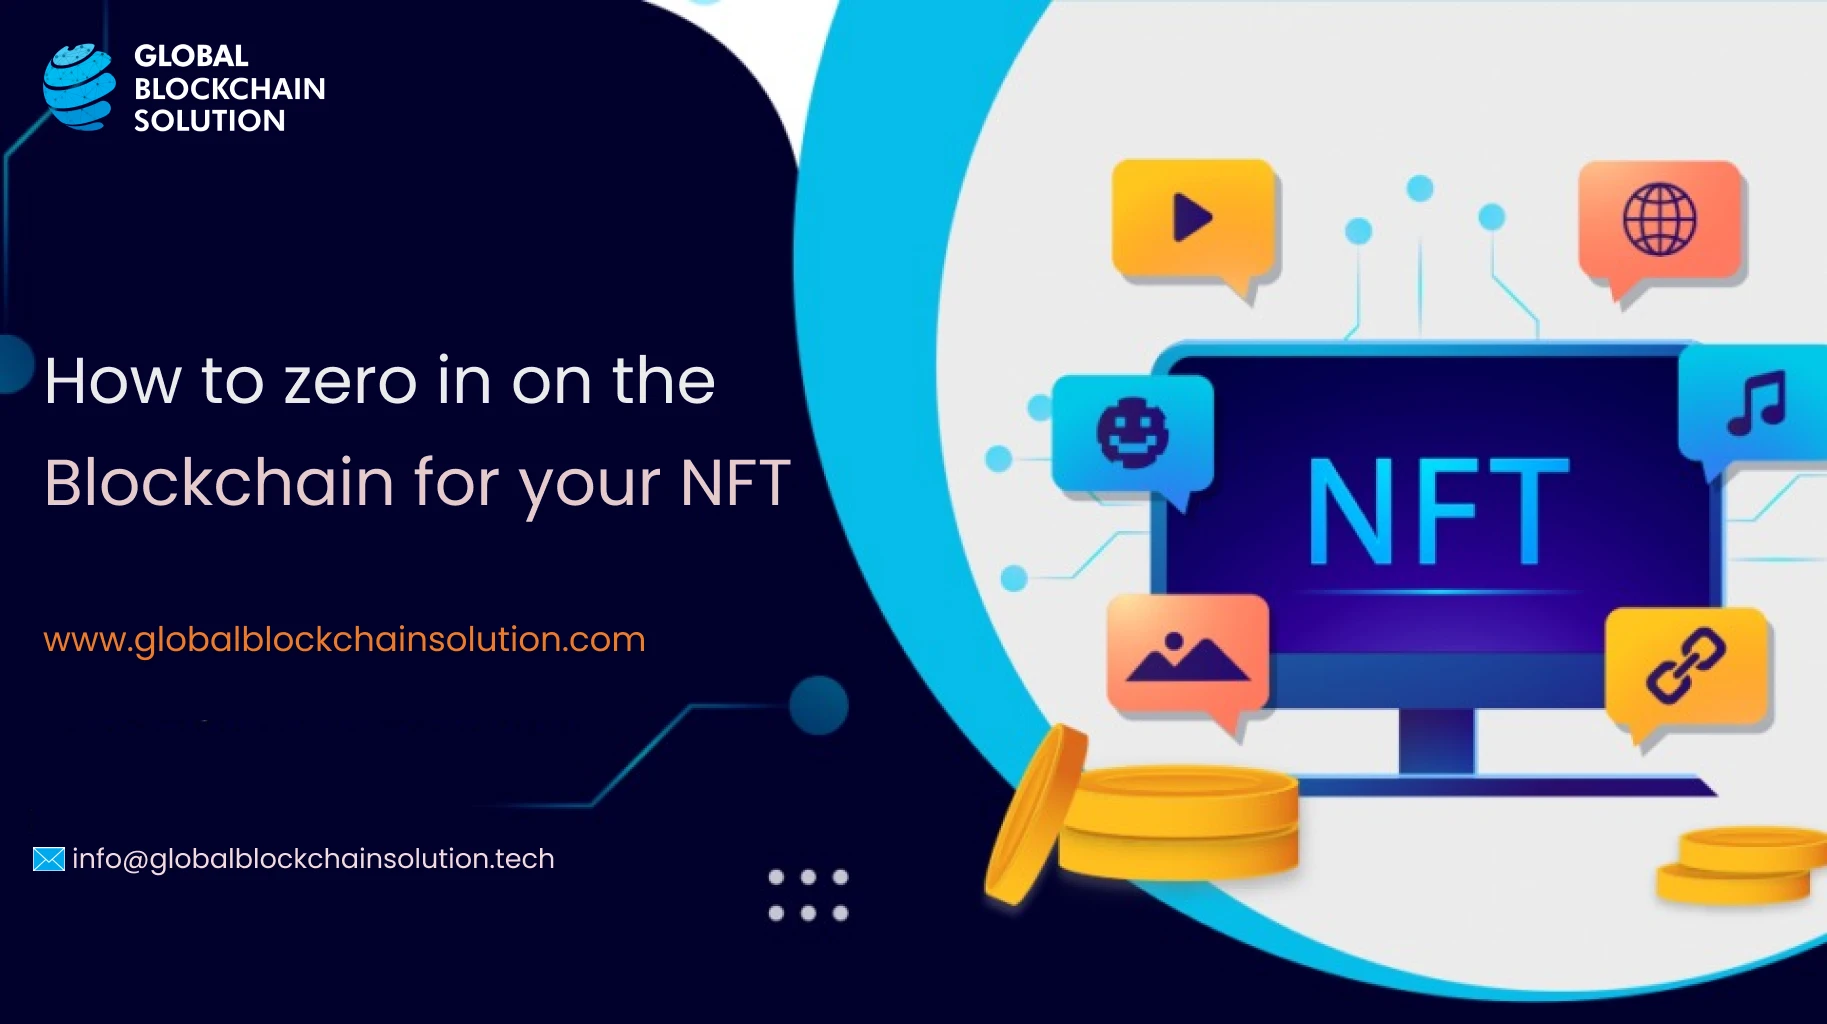 How to zero in on the blockchain for your NFT